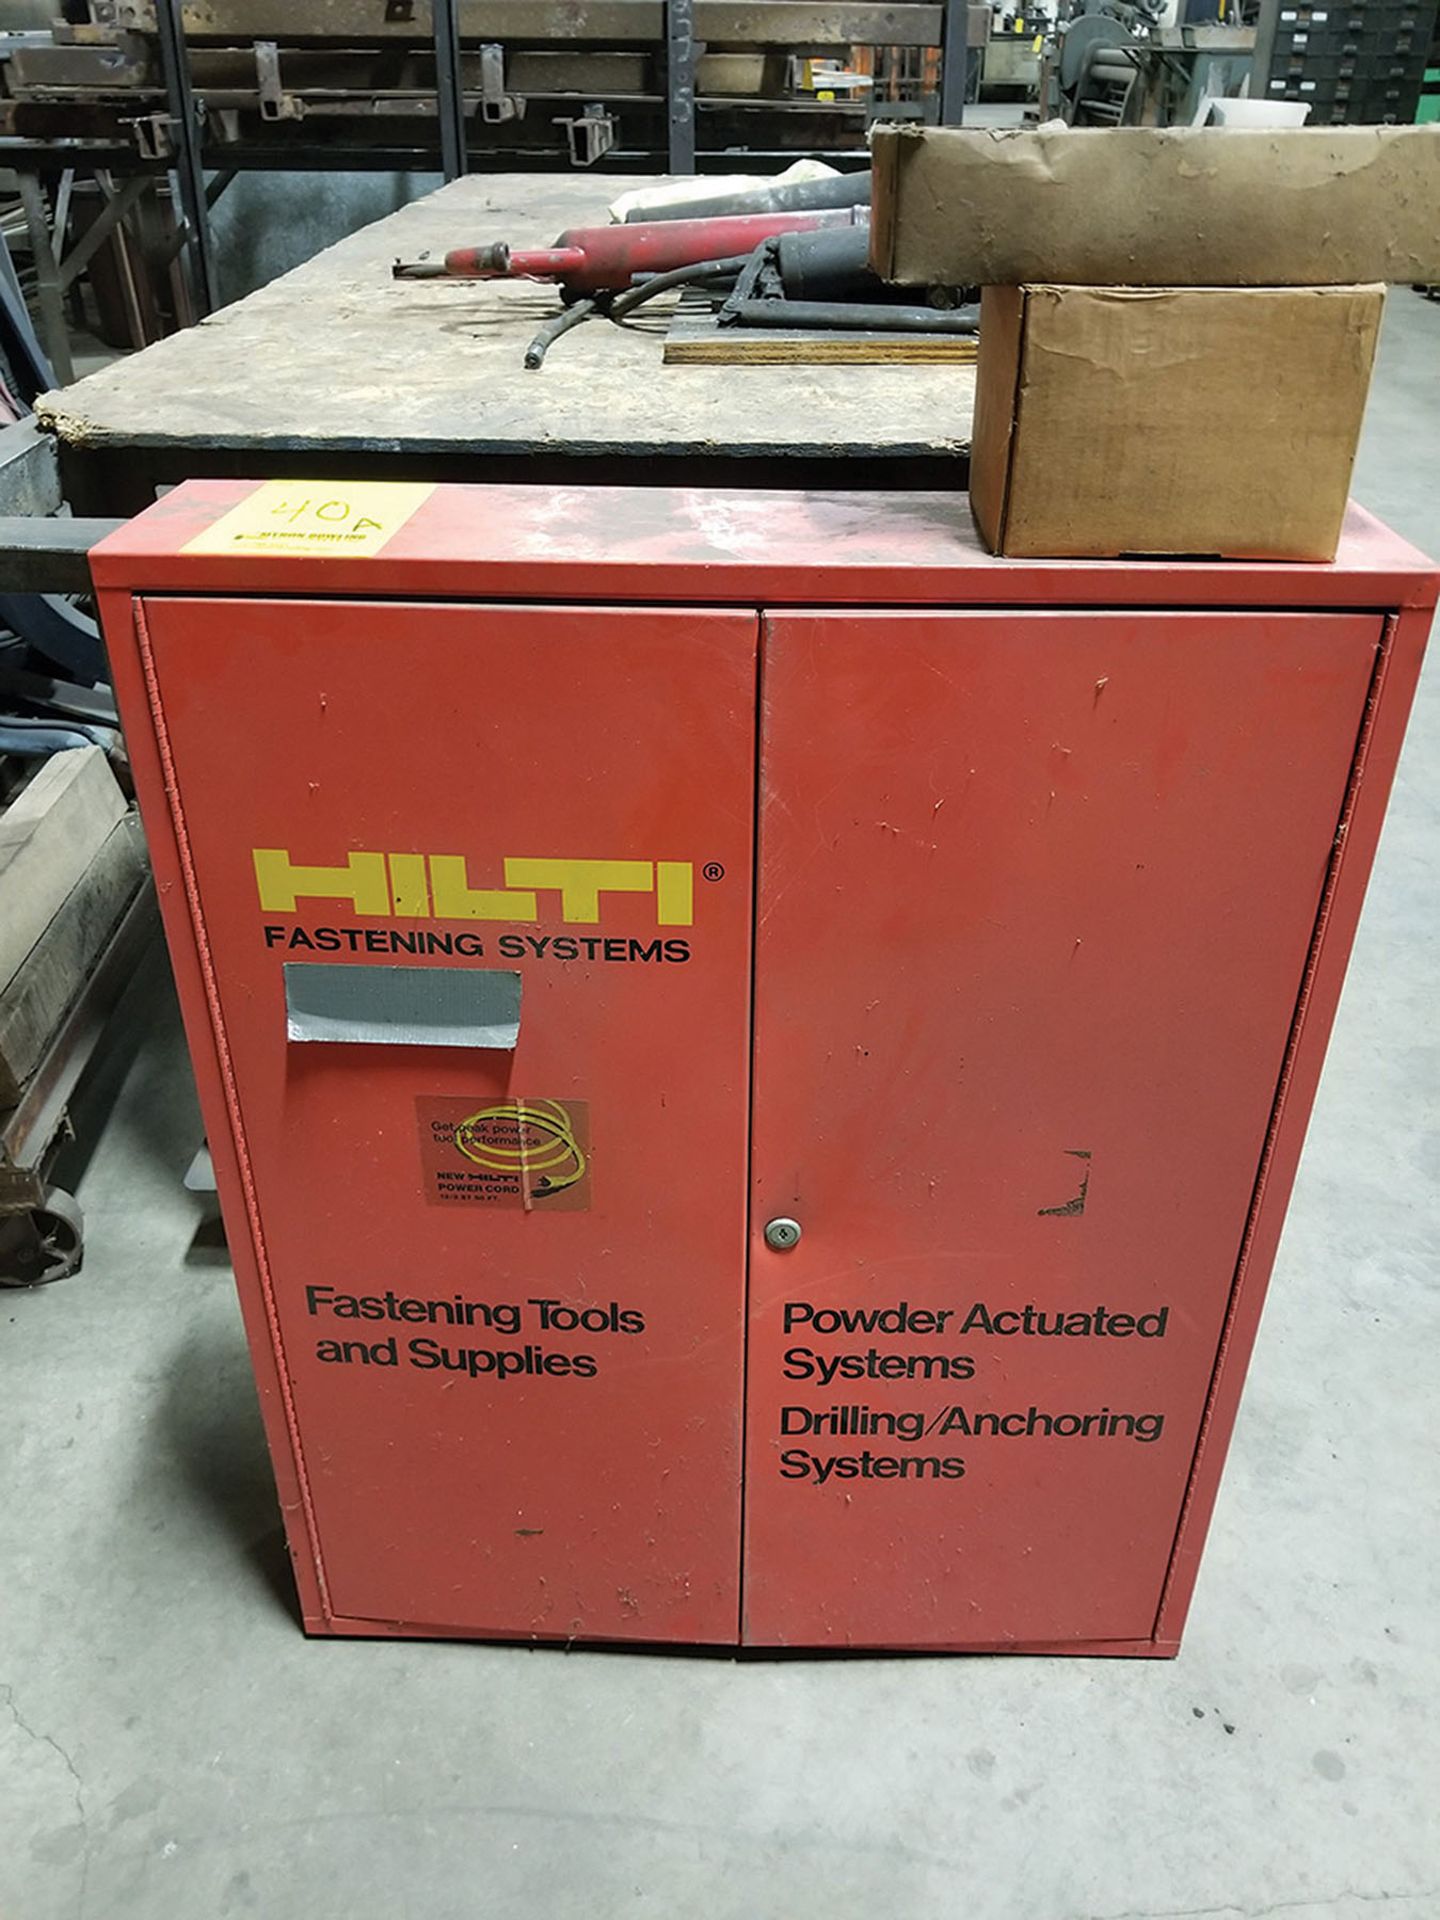 HILTI FASTENING SYSTEM CABINET WITH CONTENTS (LOCK BROKEN)